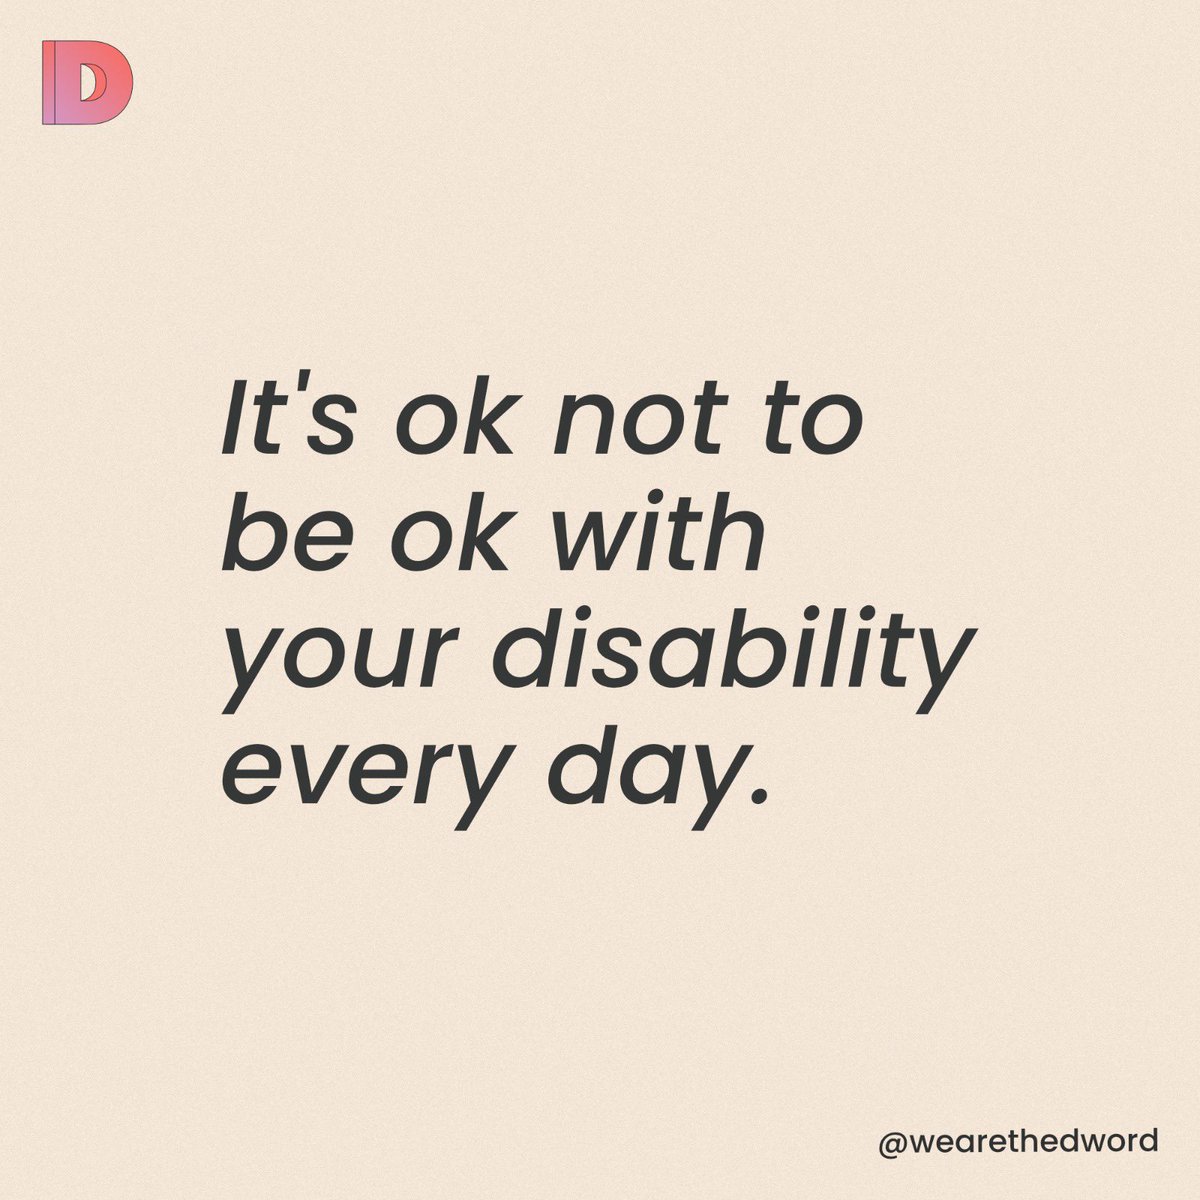 Important reminder.
•

#TheDWord #WeAreTheDWord #DisabledIsNotABadWord
#Disabled #Disability 
#DisabilityAwareness 
#NormalizeDisability